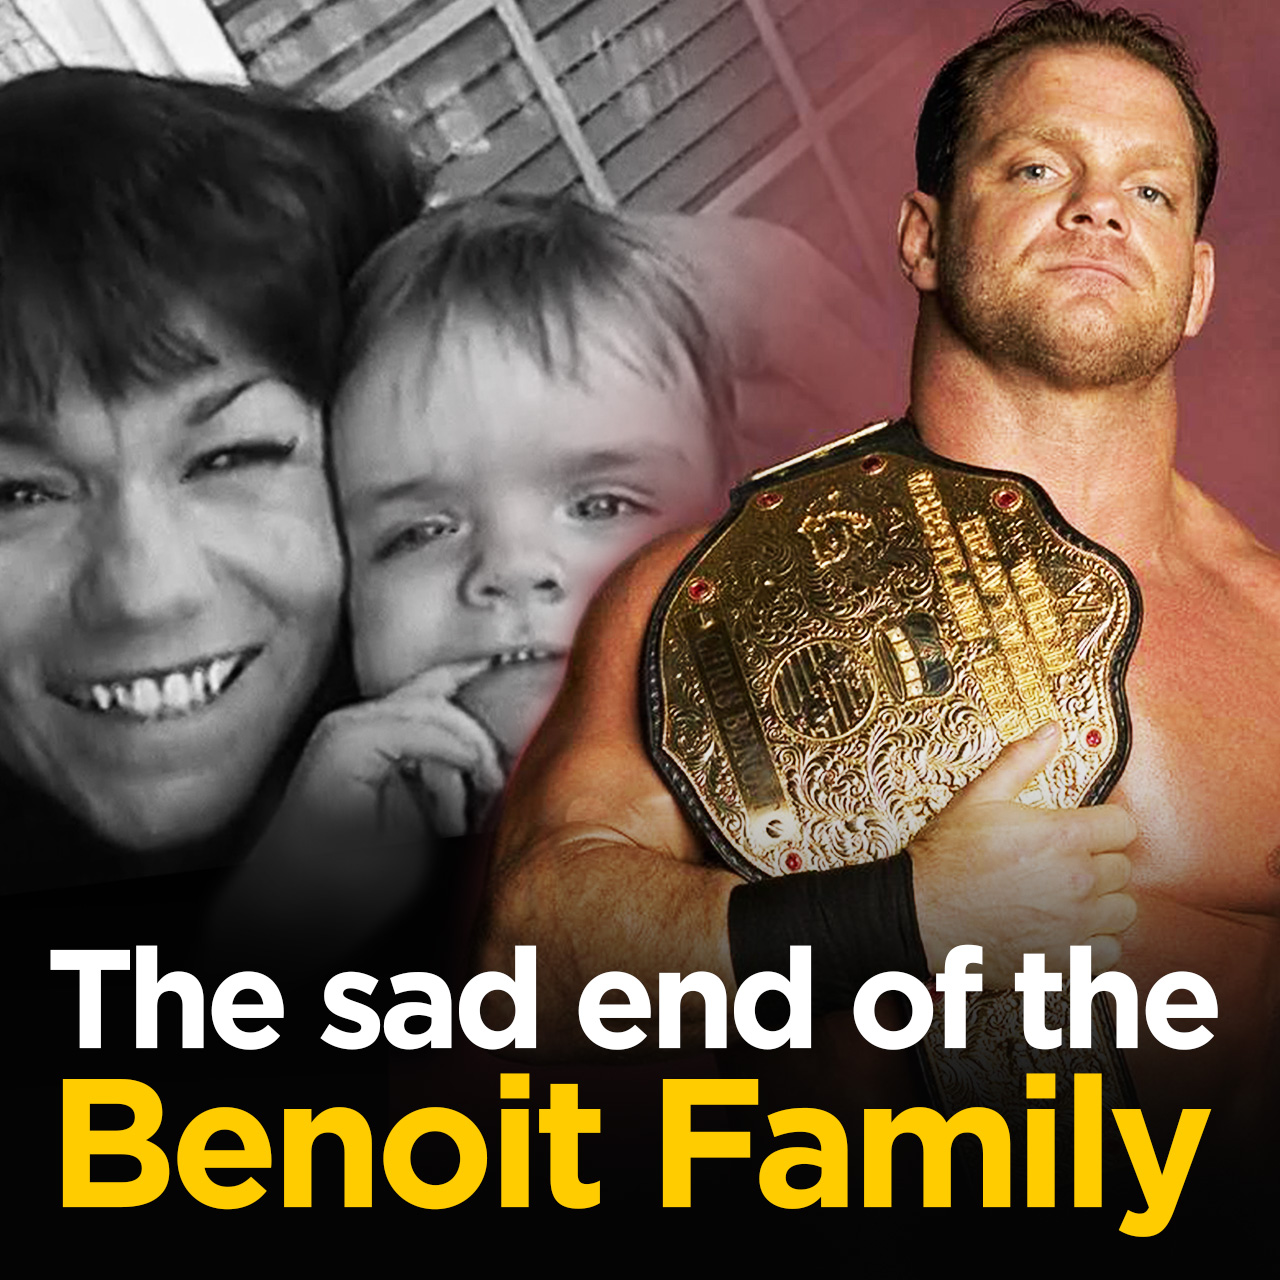 The facts behind the end of the Benoit FAMILY | Christopher Benoit